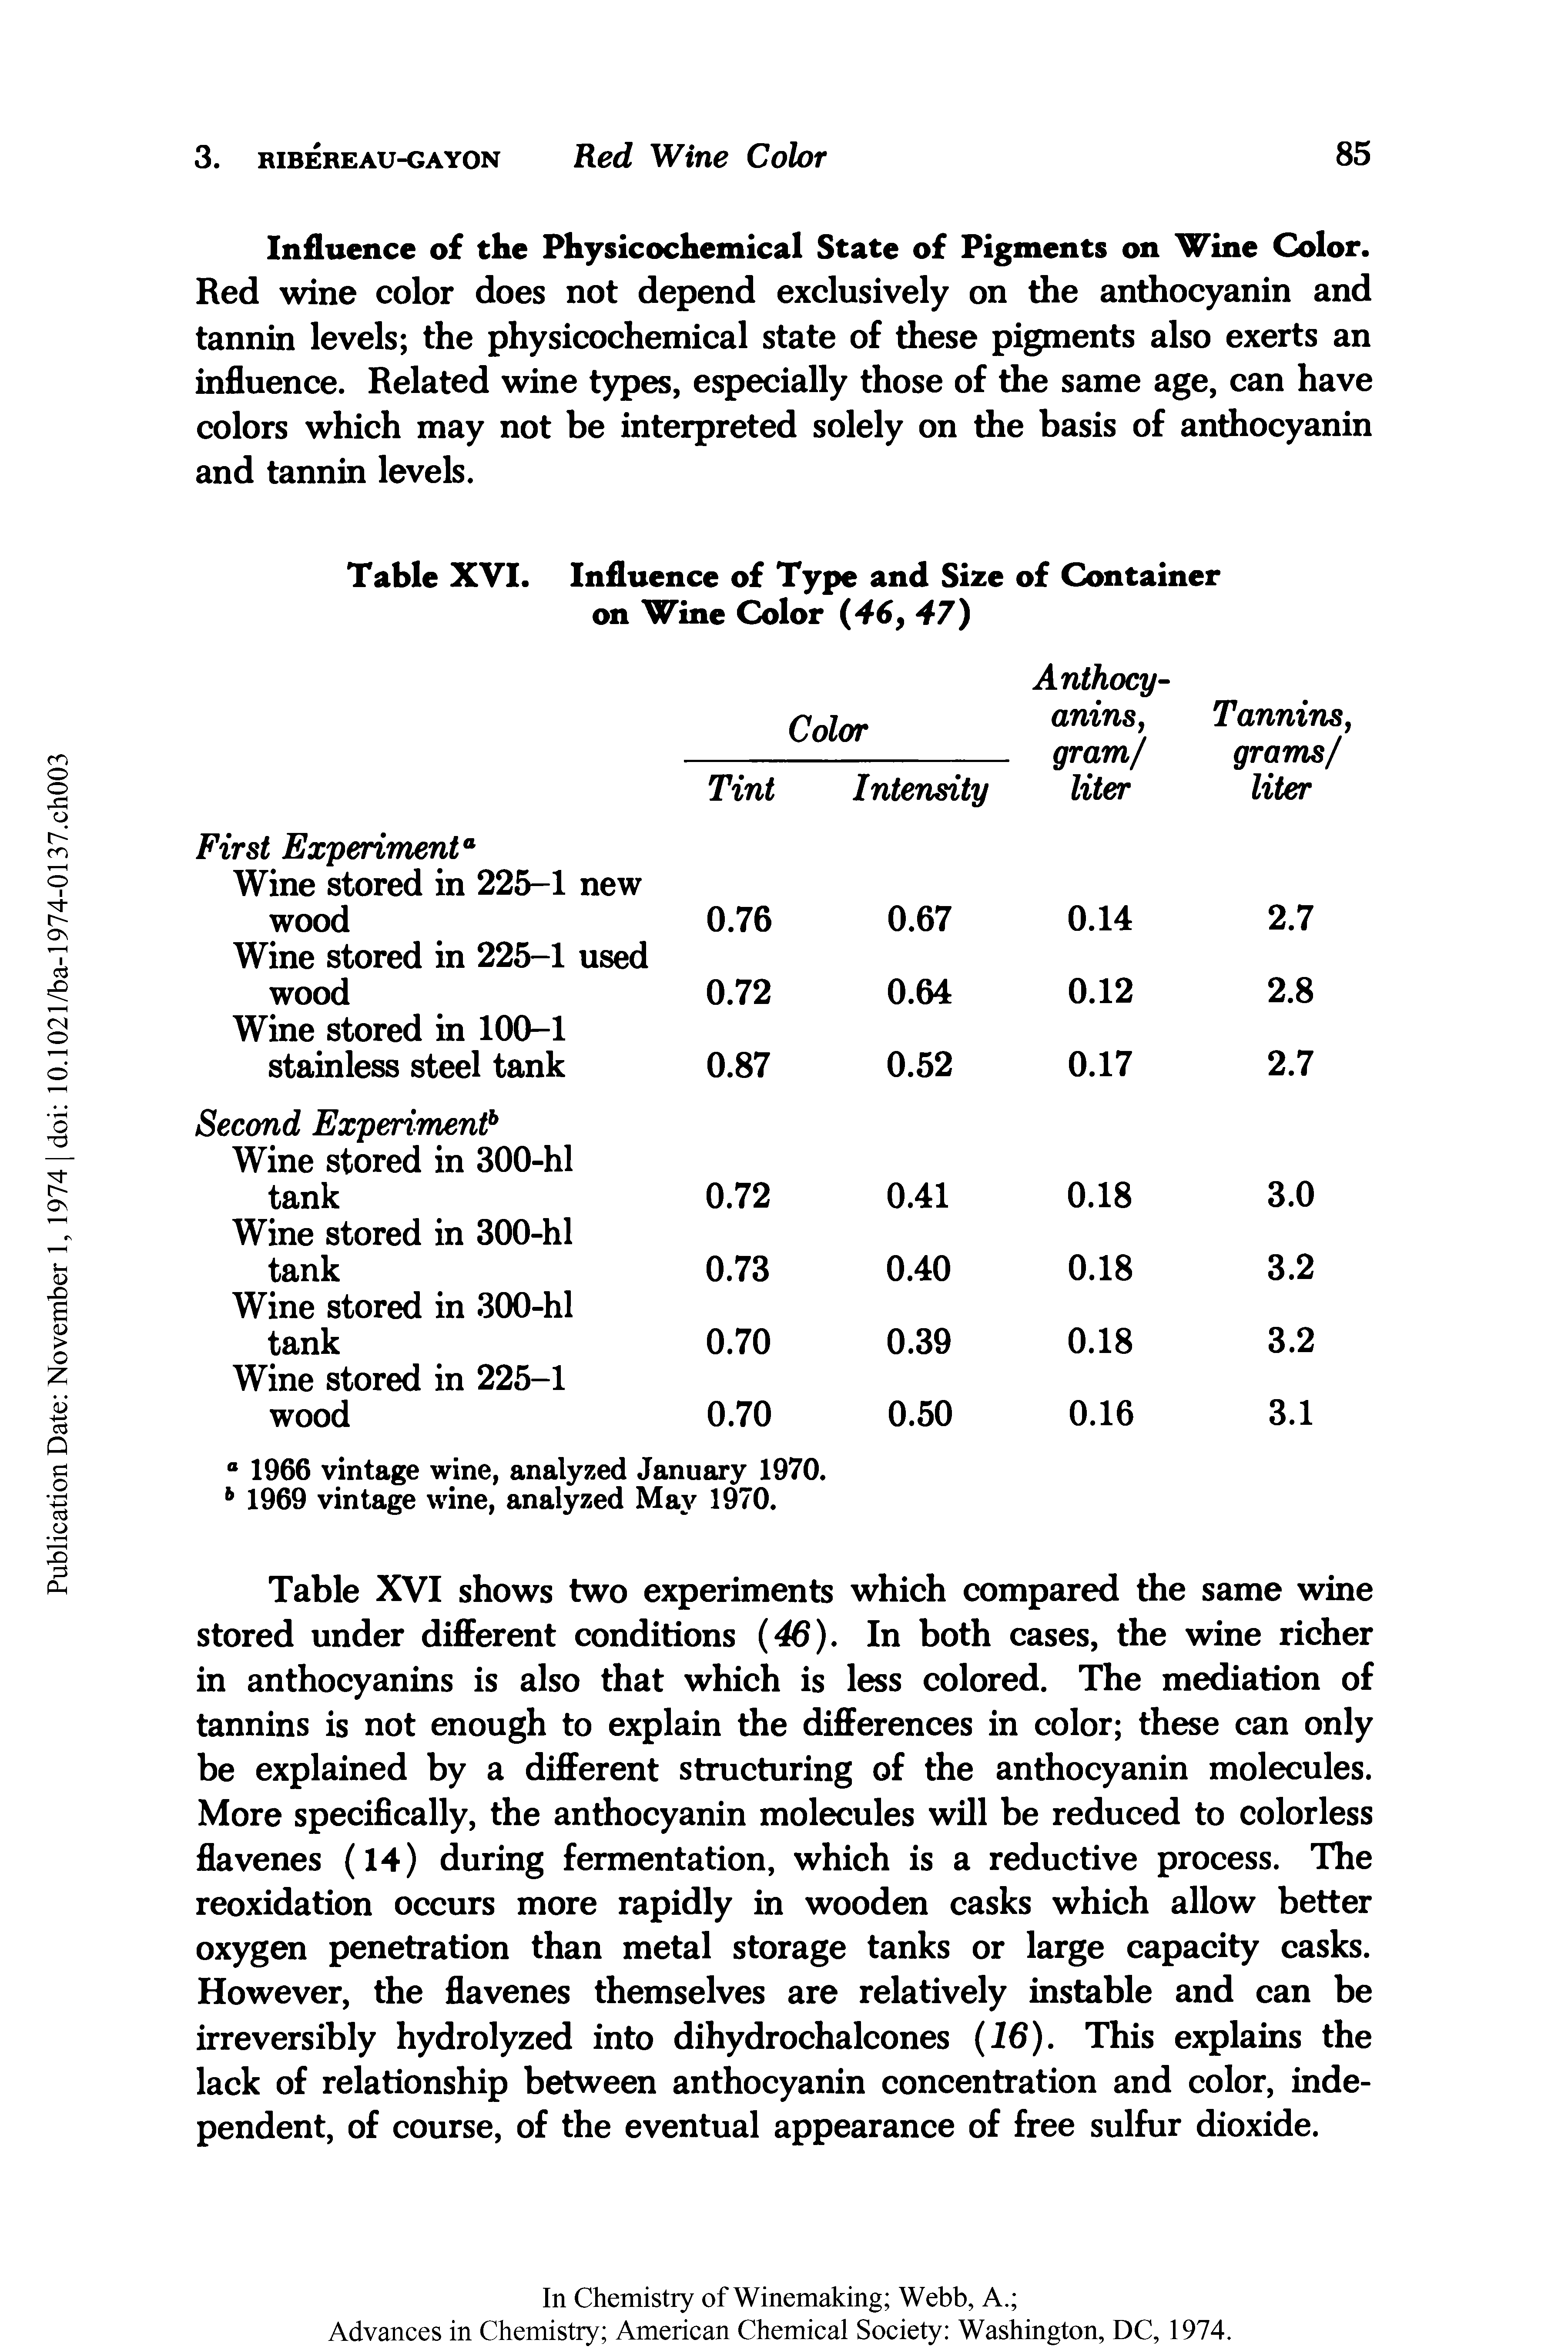 Table XVI shows two experiments which compared the same wine stored under different conditions (46). In both cases, the wine richer in anthocyanins is also that which is less colored. The mediation of tannins is not enough to explain the differences in color these can only be explained by a different structuring of the anthocyanin molecules. More specifically, the anthocyanin molecules will be reduced to colorless flavenes (14) during fermentation, which is a reductive process. The reoxidation occurs more rapidly in wooden casks which allow better oxygen penetration than metal storage tanks or large capacity casks. However, the flavenes themselves are relatively instable and can be irreversibly hydrolyzed into dihydrochalcones (16). This explains the lack of relationship between anthocyanin concentration and color, independent, of course, of the eventual appearance of free sulfur dioxide.